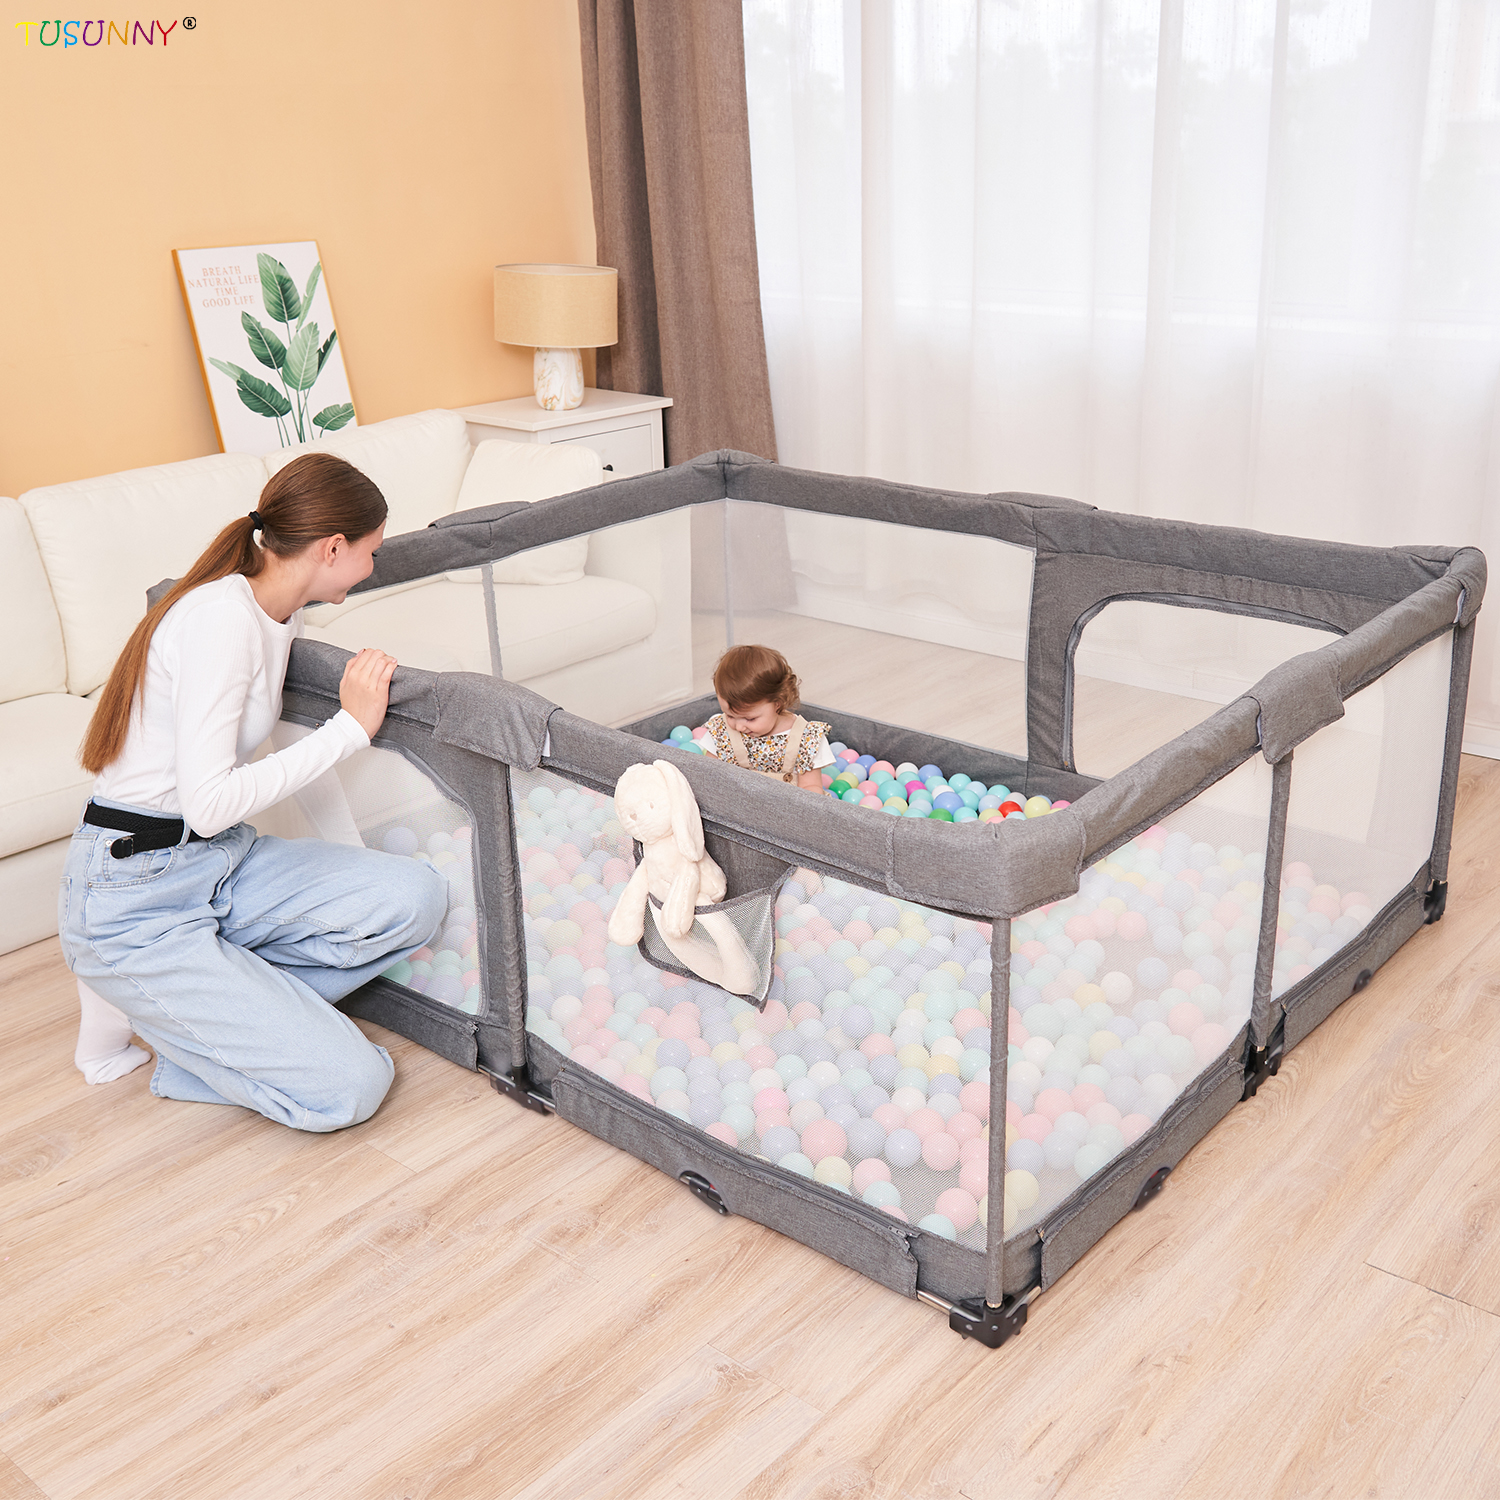 SH1.412A New Free Installation Of Play Fence Convenient Design Of Children'S Play Fence